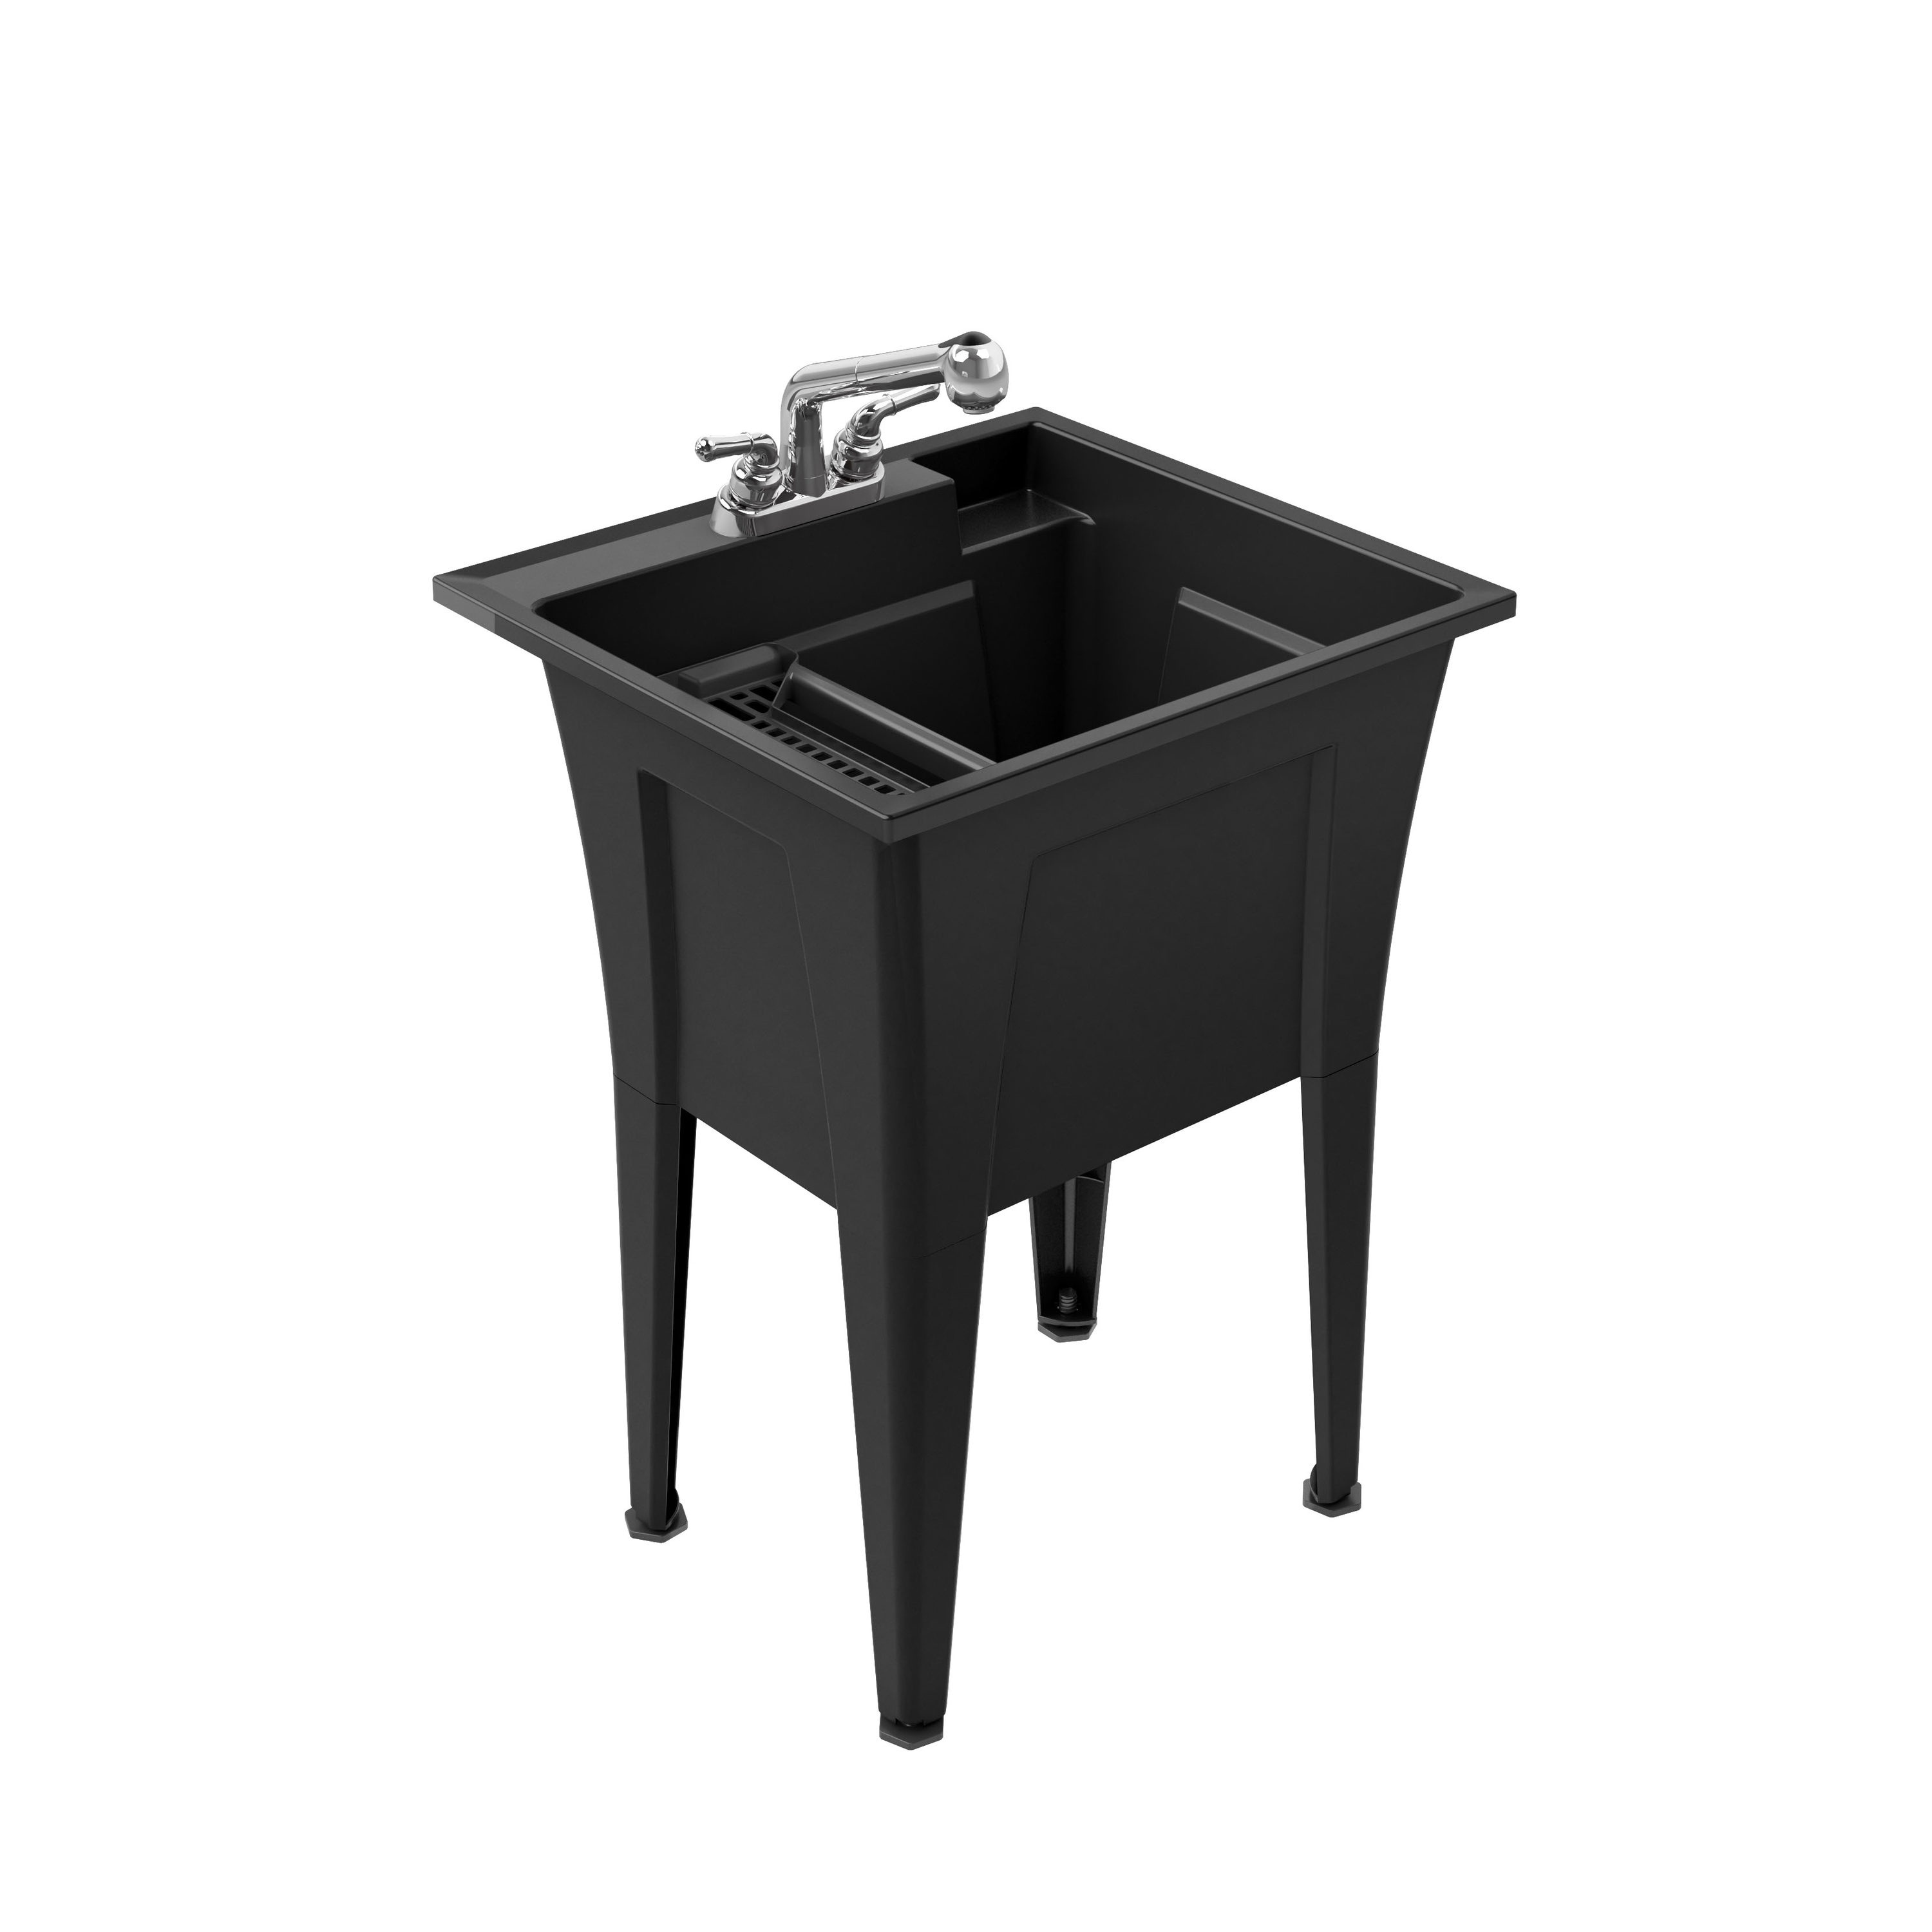 Rugged Tub 24 In X 22 Recycled Polypropylene Black Laundry Sink With 2 Hdl Non Metallic Pullout Faucet And Installation Kit B24bk1